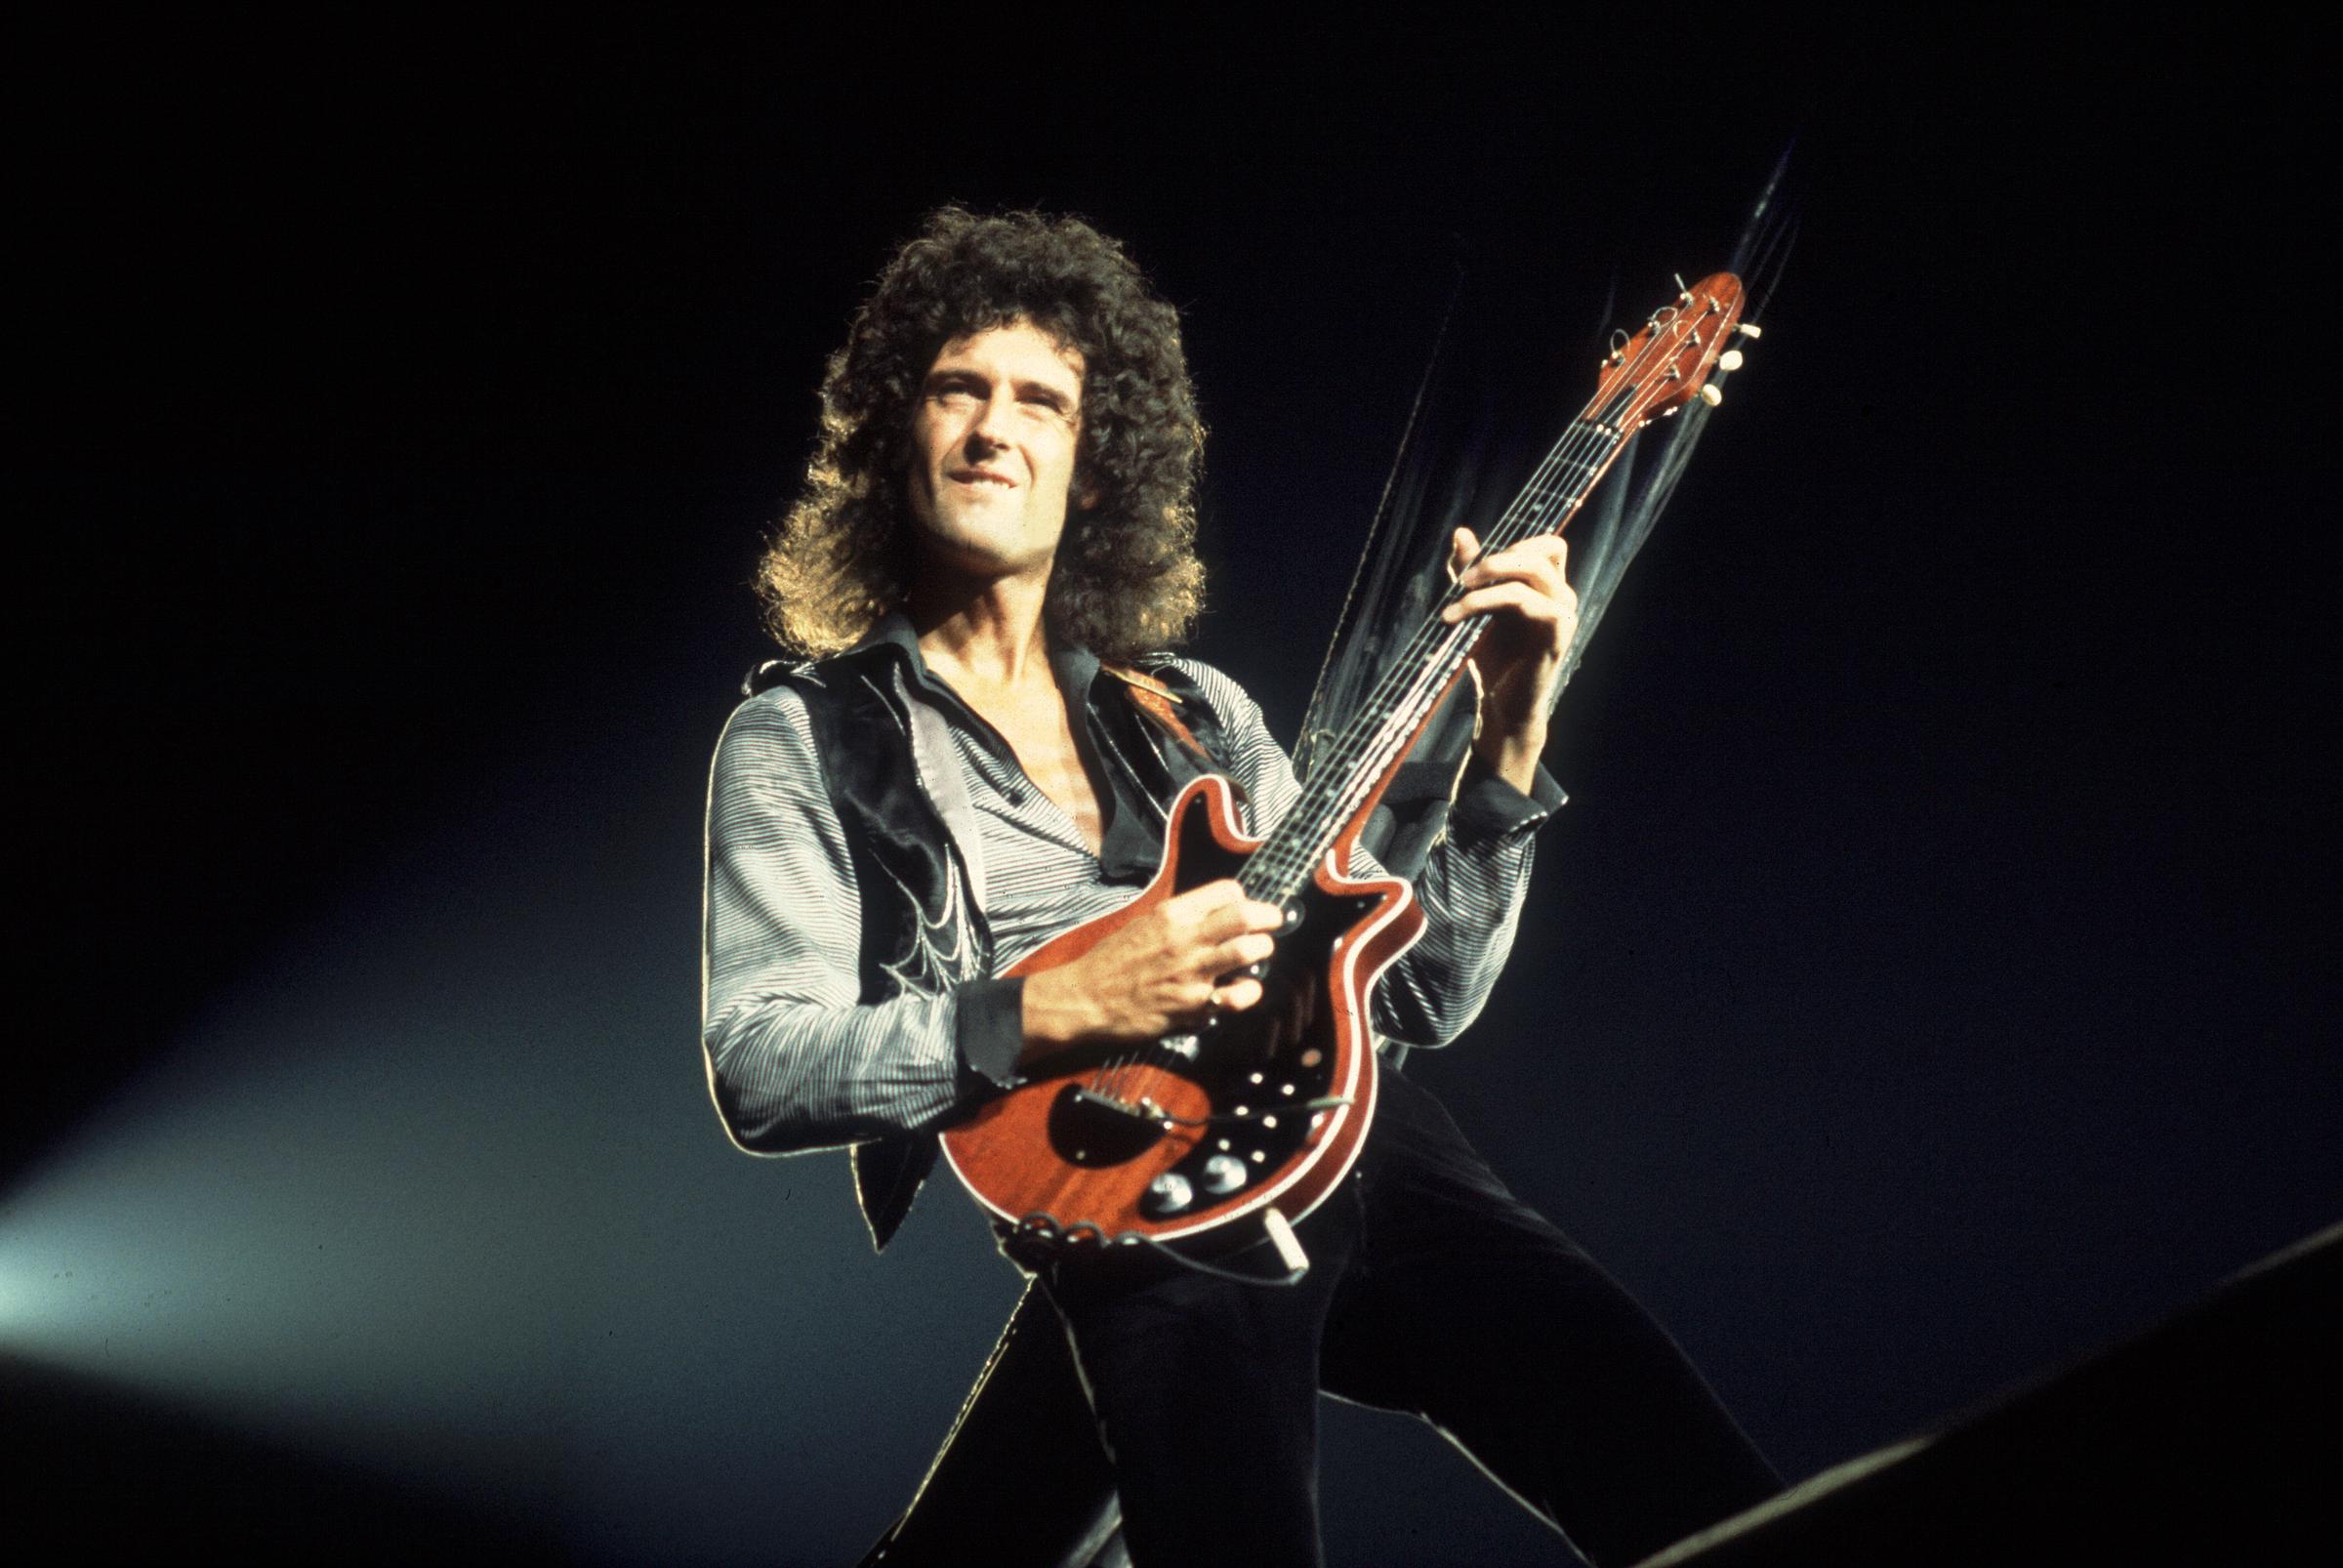 Brian May of Queen performs on stage in Rosemont, Illinois, on September 19, 1980. | Source: Getty Images